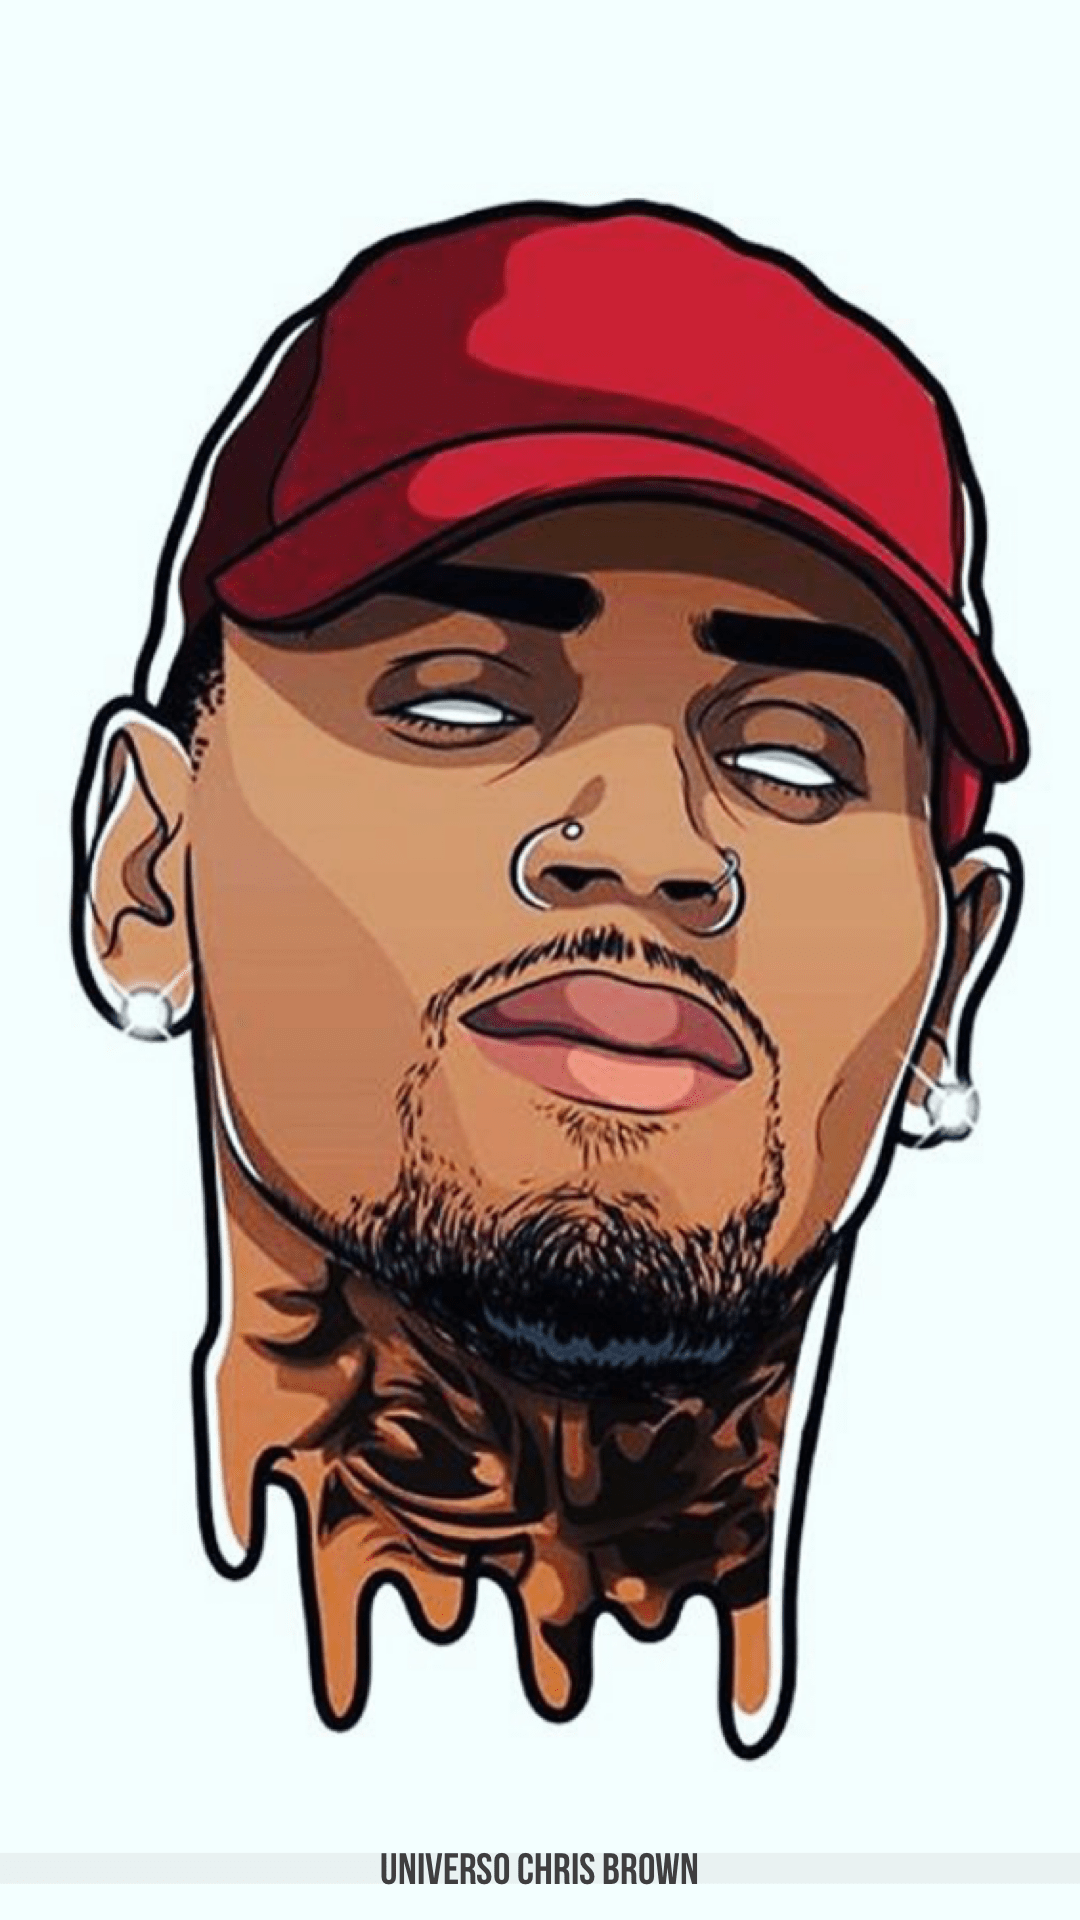 Chris Brown Images | Icons, Wallpapers and Photos on Fanpop